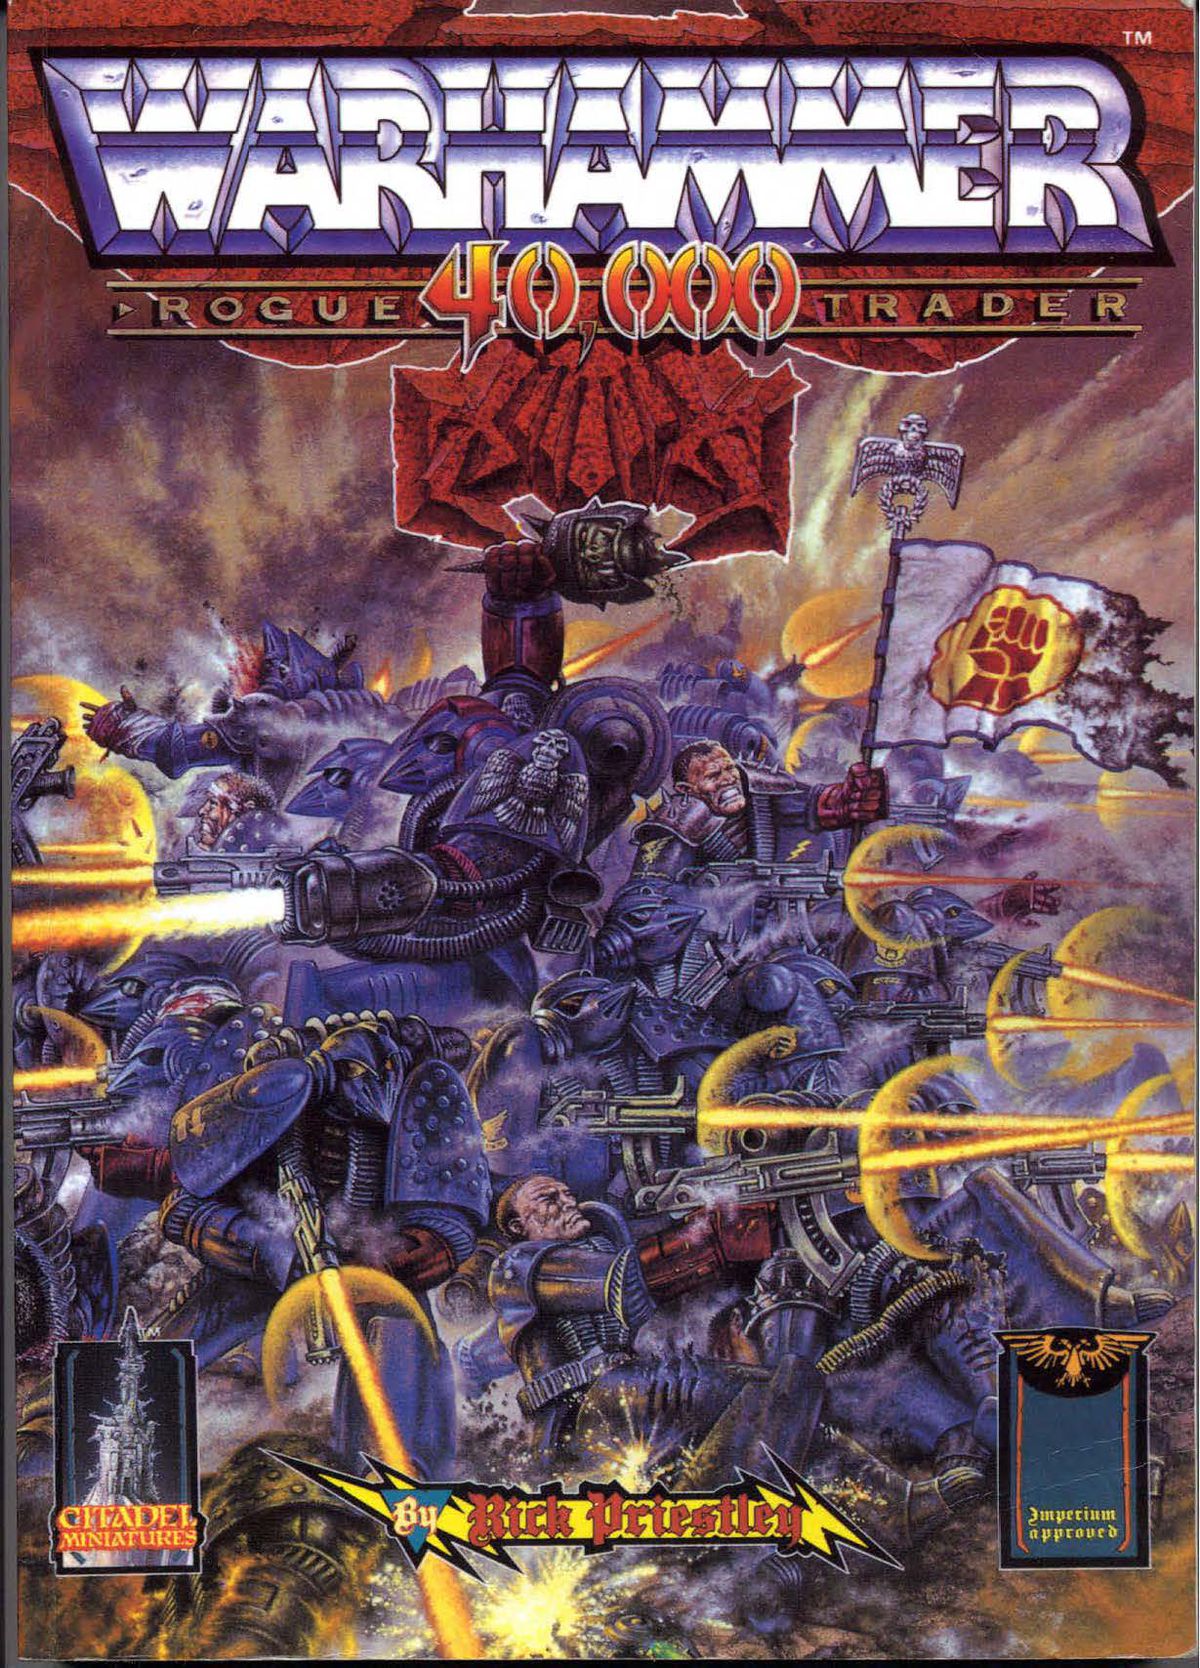 Cover for the original Warhammer 40,000 rulebook, released in 1987. The official title is Rogue Trader: Warhammer 40,000.